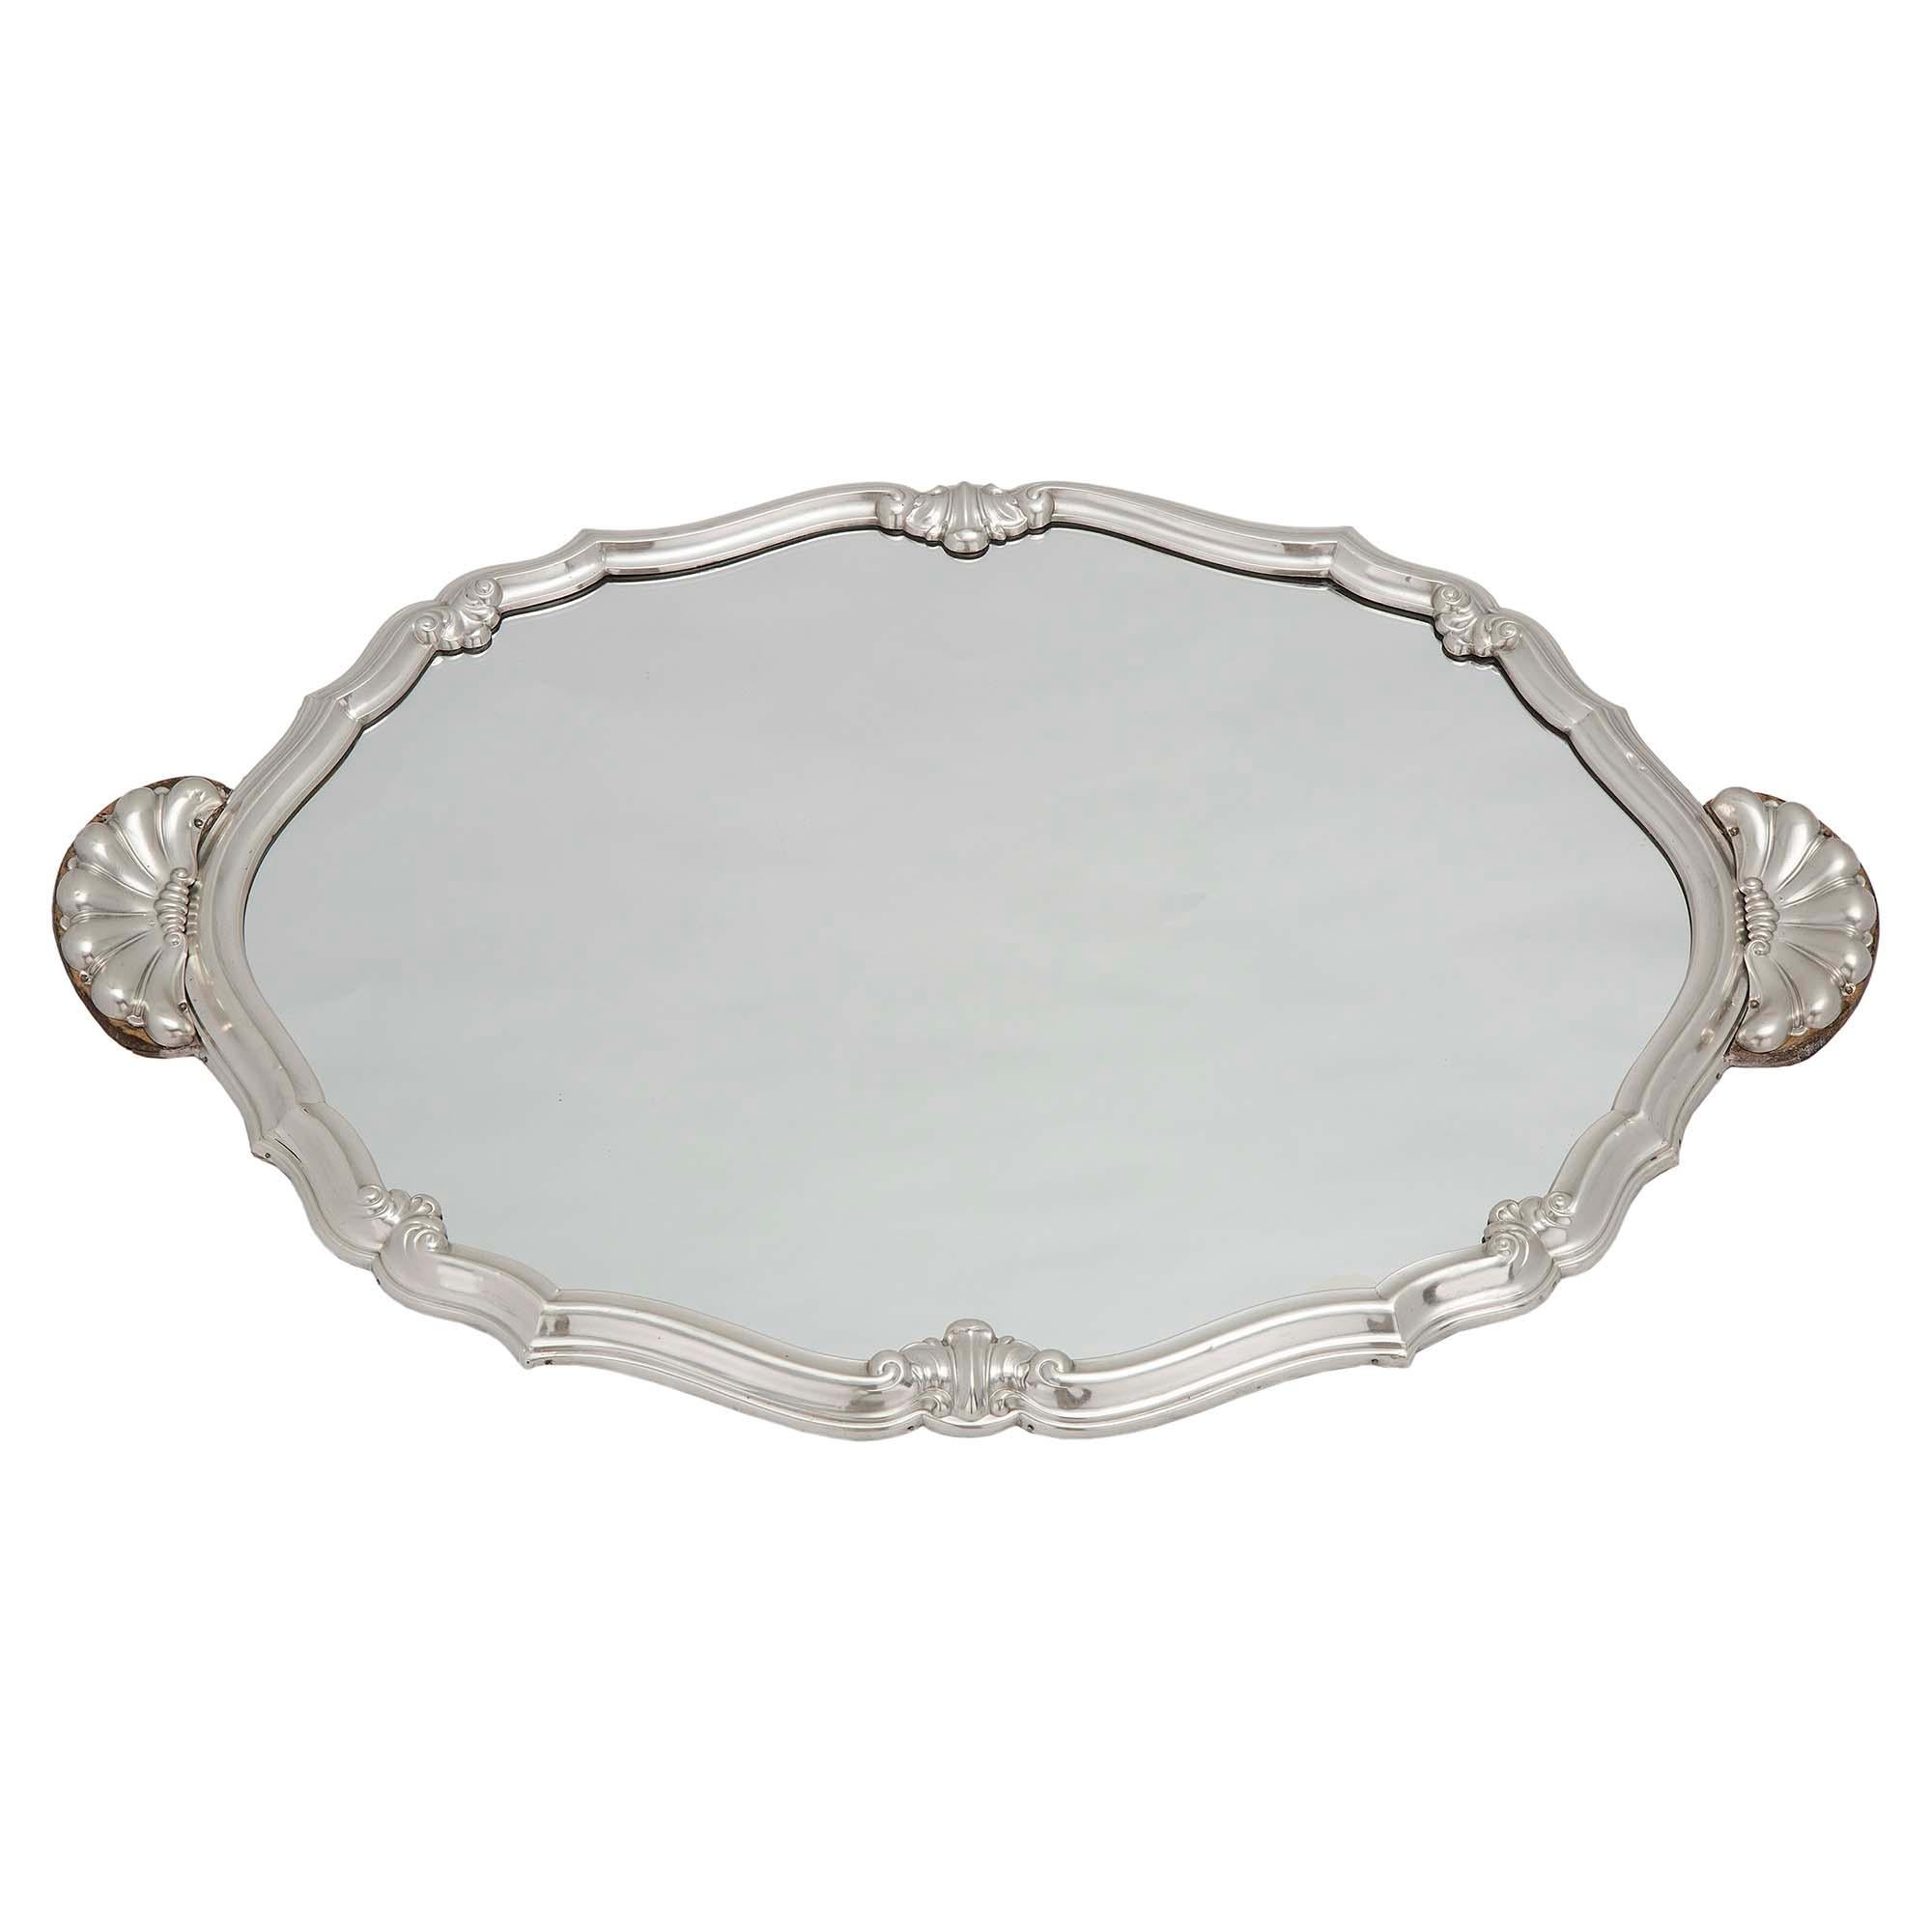 An elegant French 19th century Louis XV st. silvered bronze mirrored plateau. The centerpiece retains the original mirror plate and is framed within a fine scalloped shaped mottled silvered bronze border with decorative foliate reserves and charming